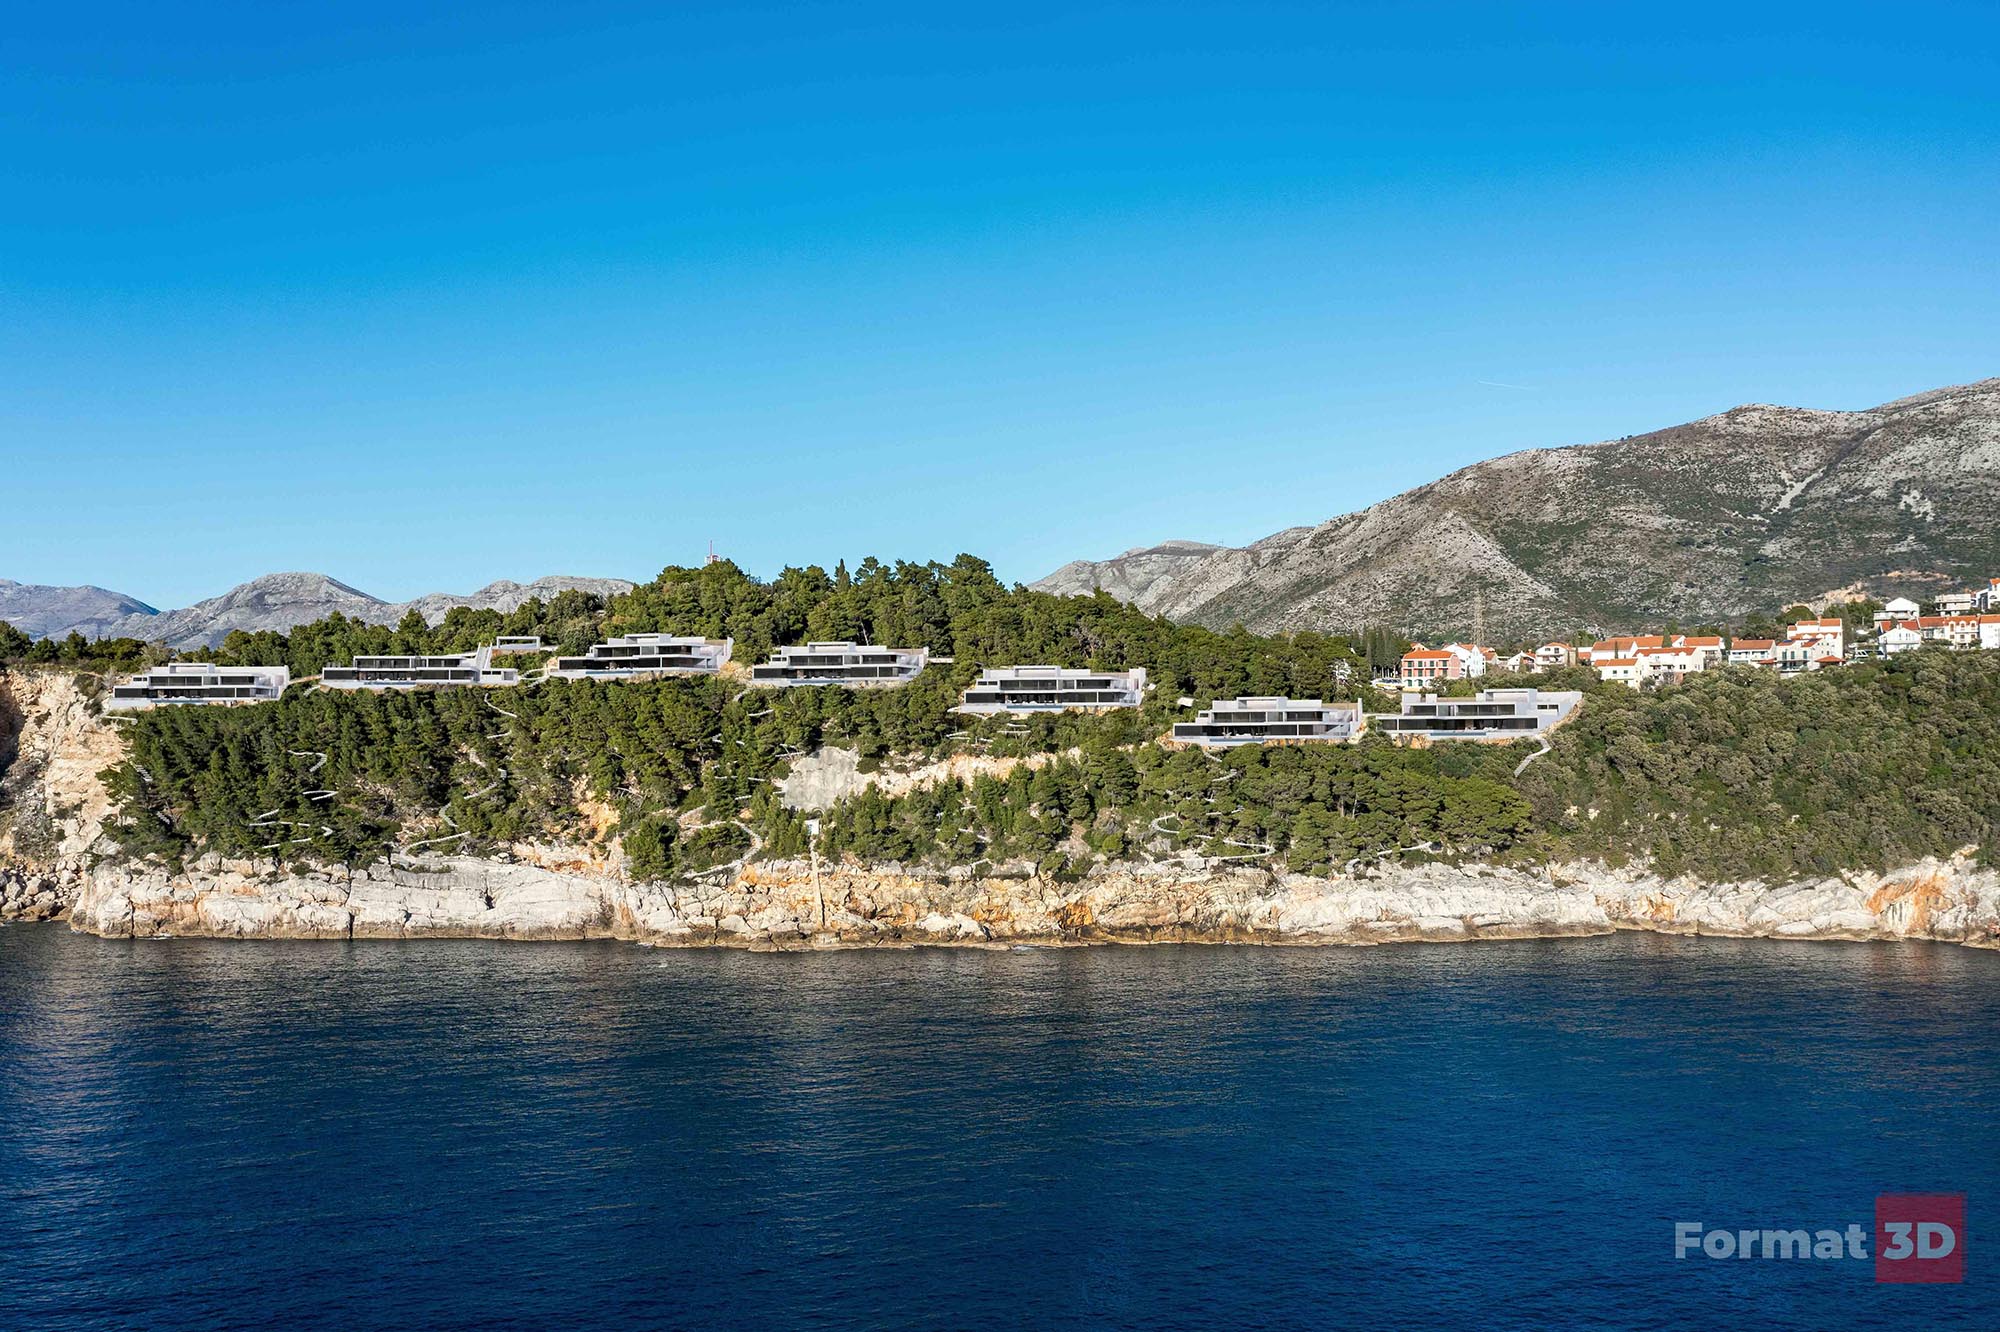 Photomontage of Dolabella Heights, Cavtat, Dubrovnik